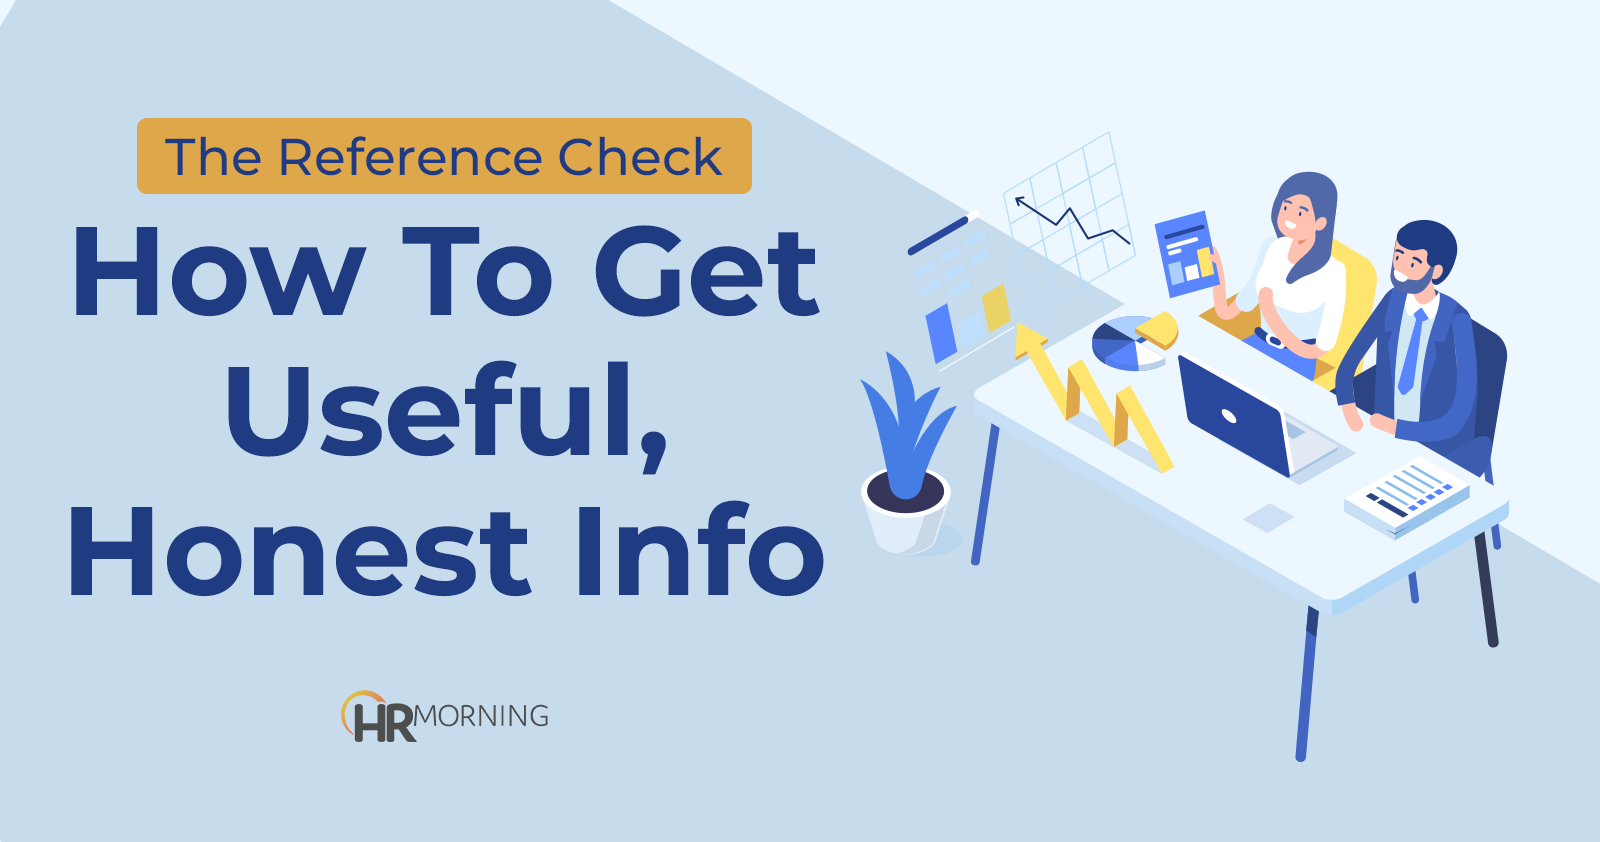 Reference Check: How to get useful, honest info